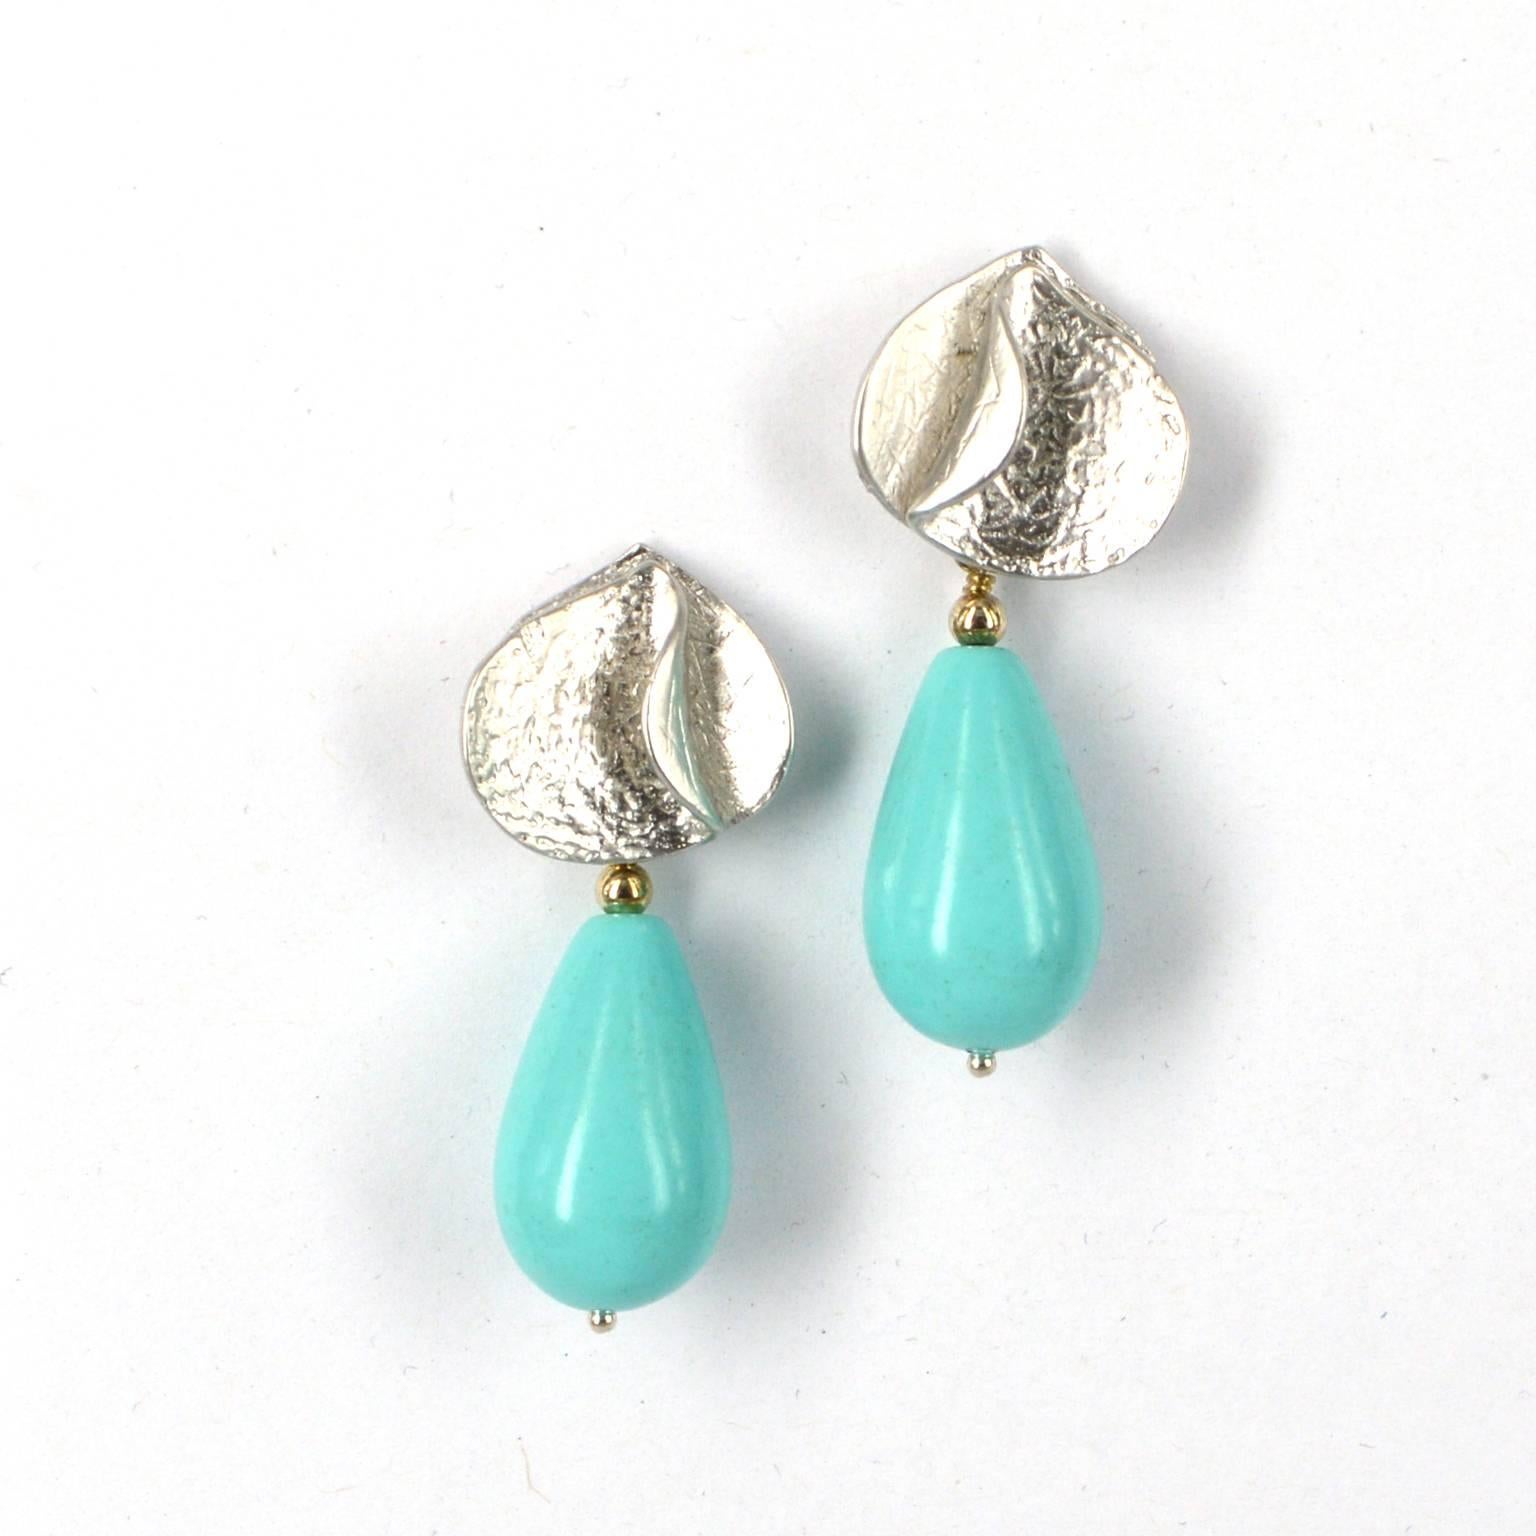 Modern Decadent Jewels White Gold Turquoise Earrings